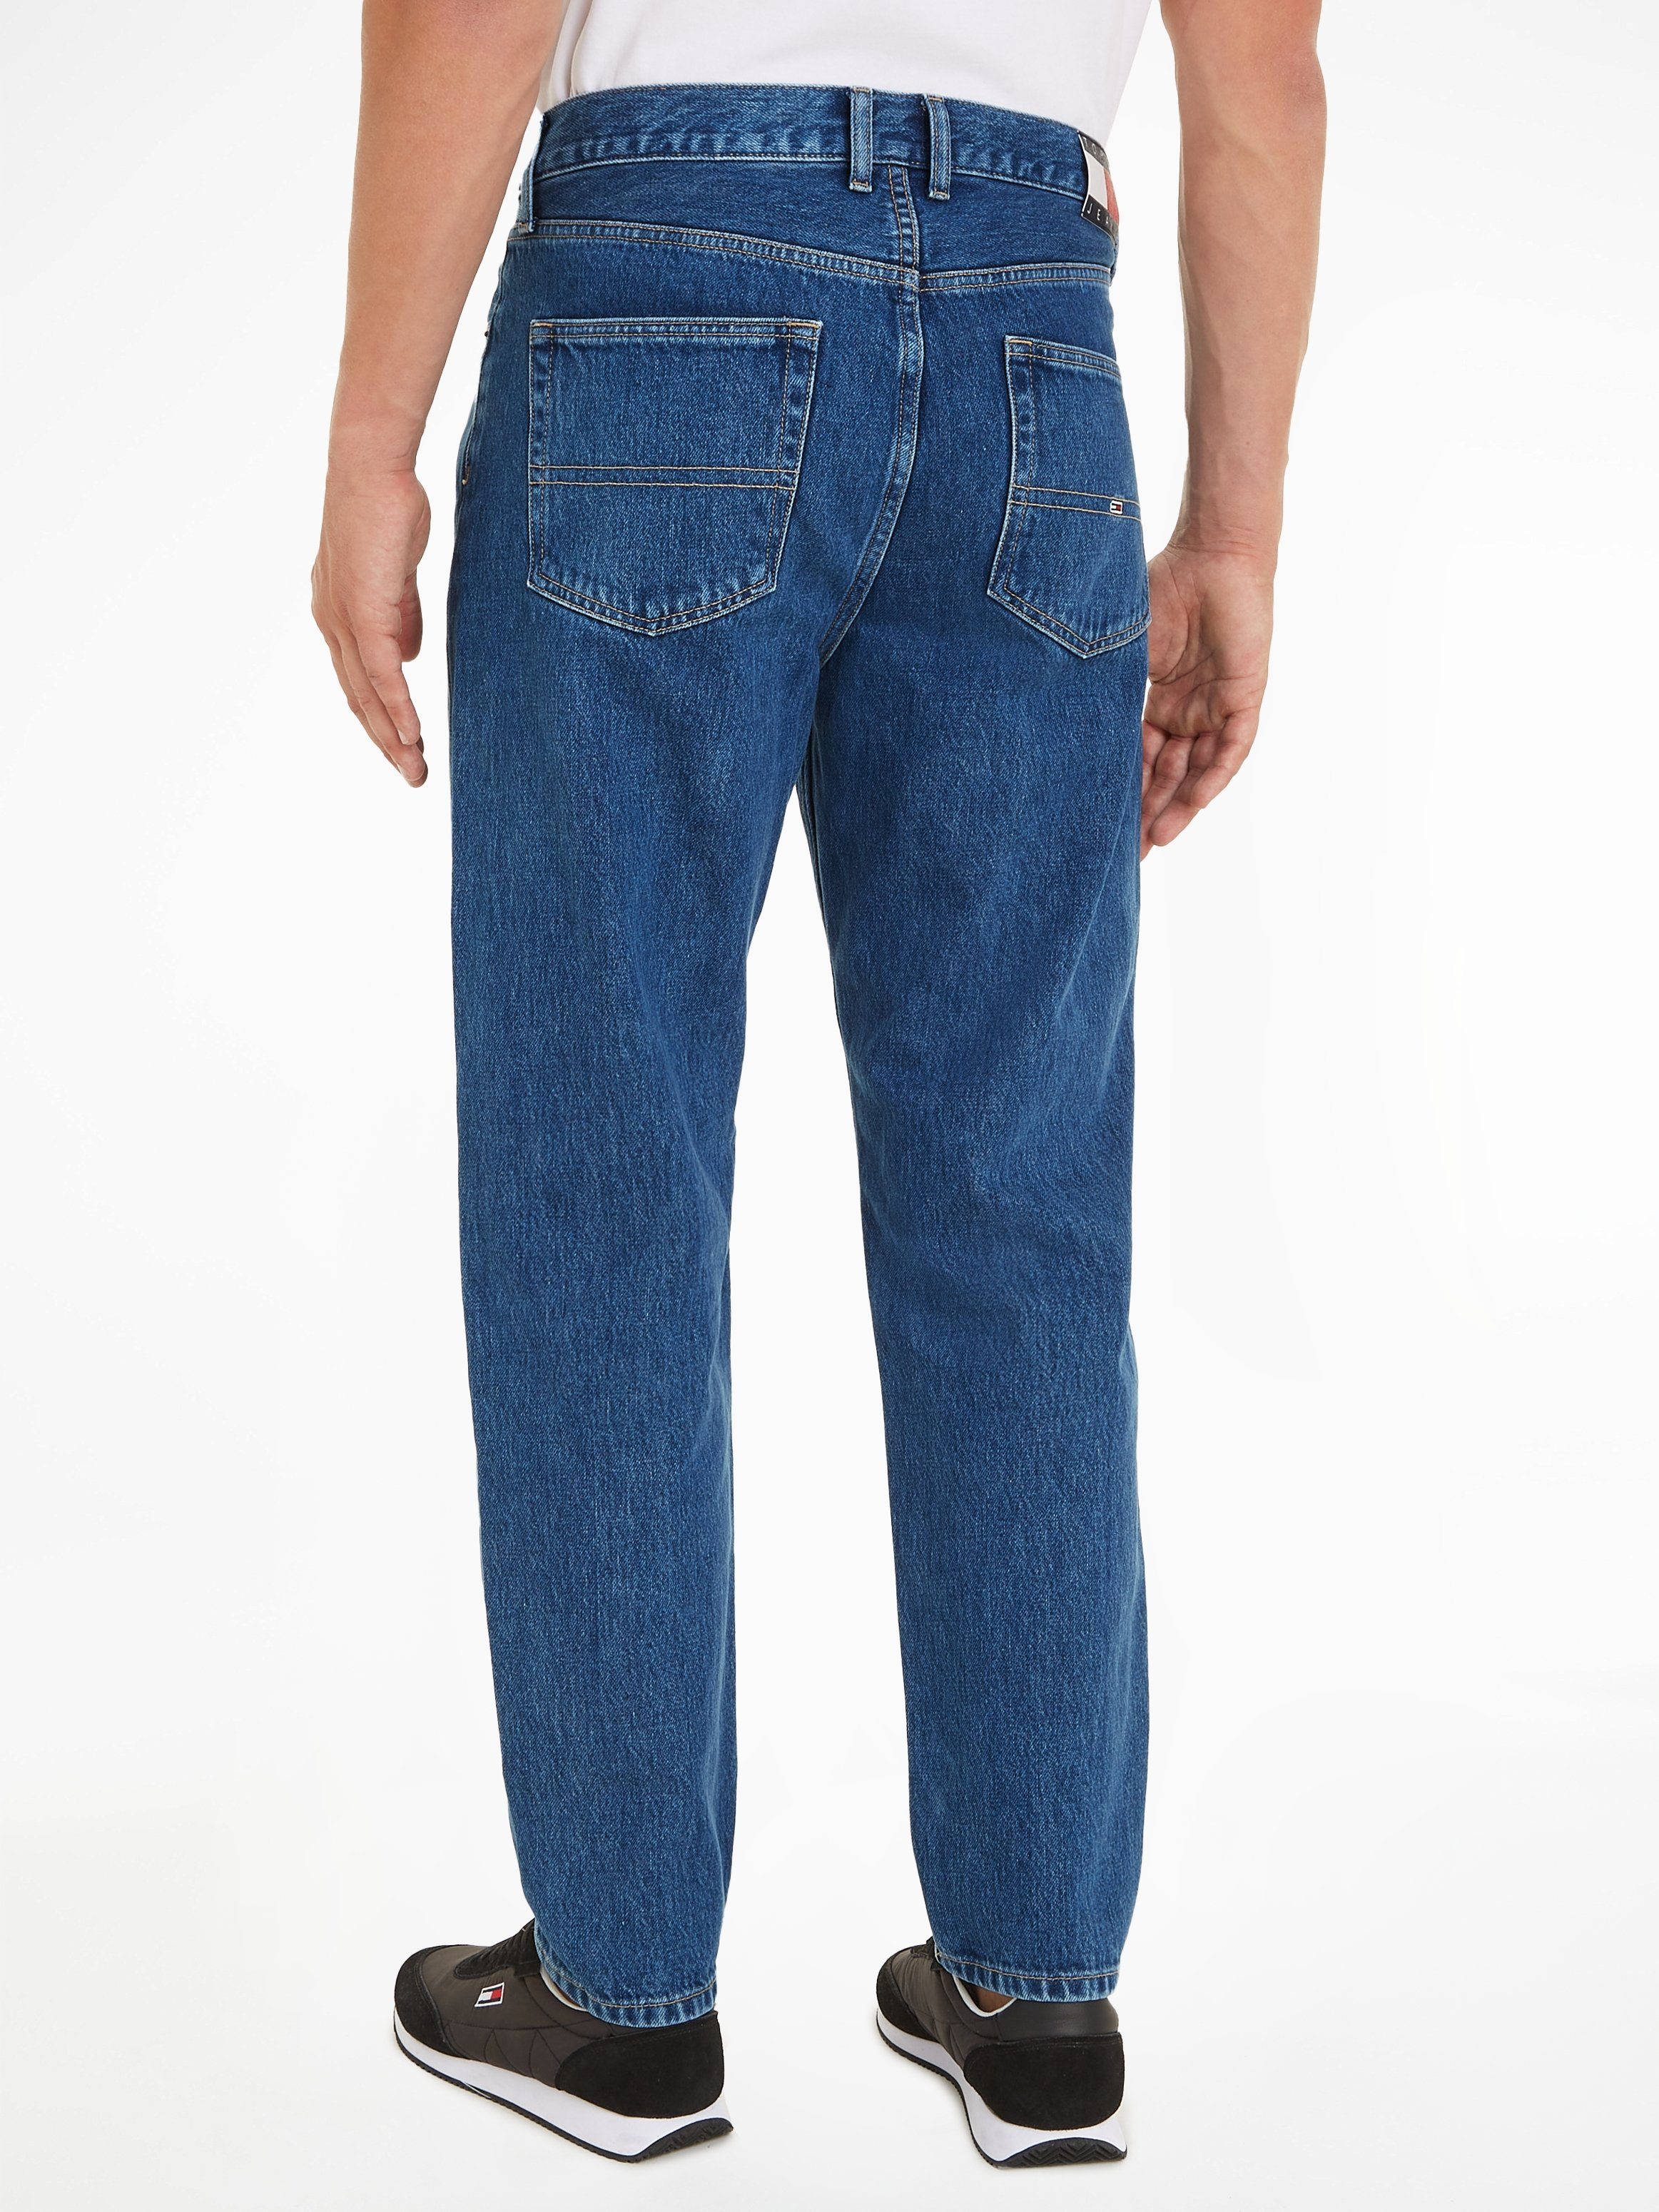 RLXD im Tommy TAPERED Denim ISAAC Jeans 5-Pocket-Style Medium Tapered-fit-Jeans